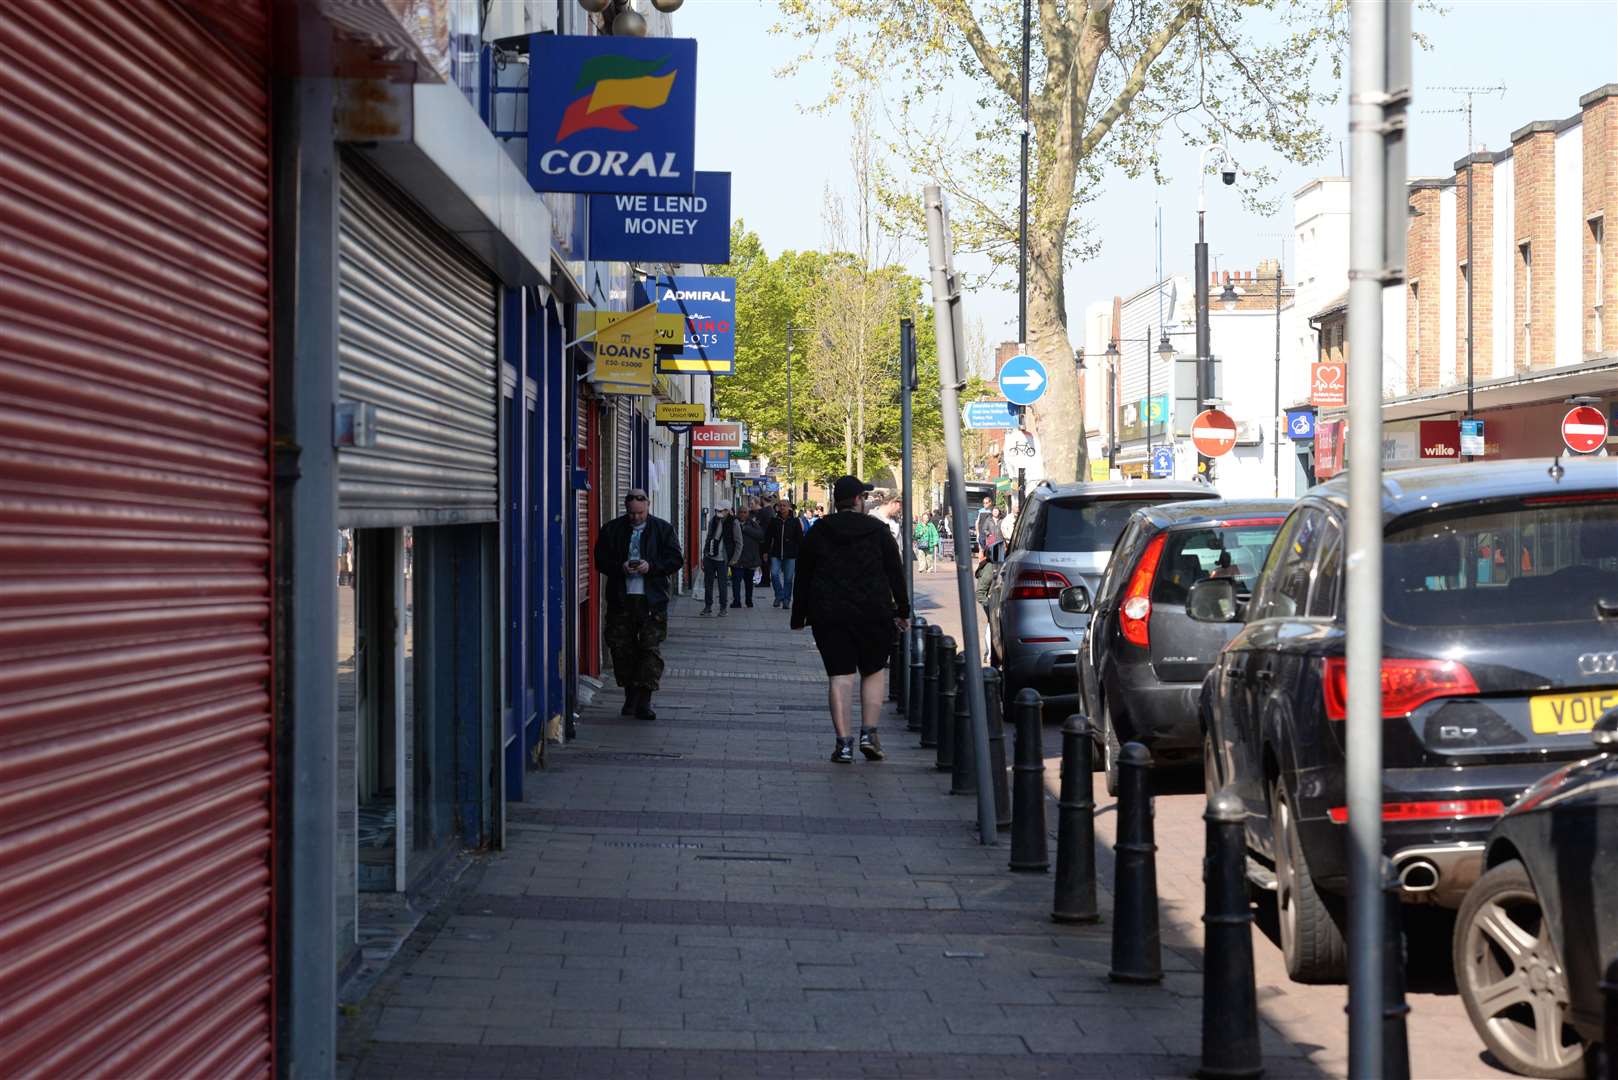 Officers and PCSOs will be authorised to stop anyone involved in anti-social behaviour and move them on from the area. Picture: Chris Davey